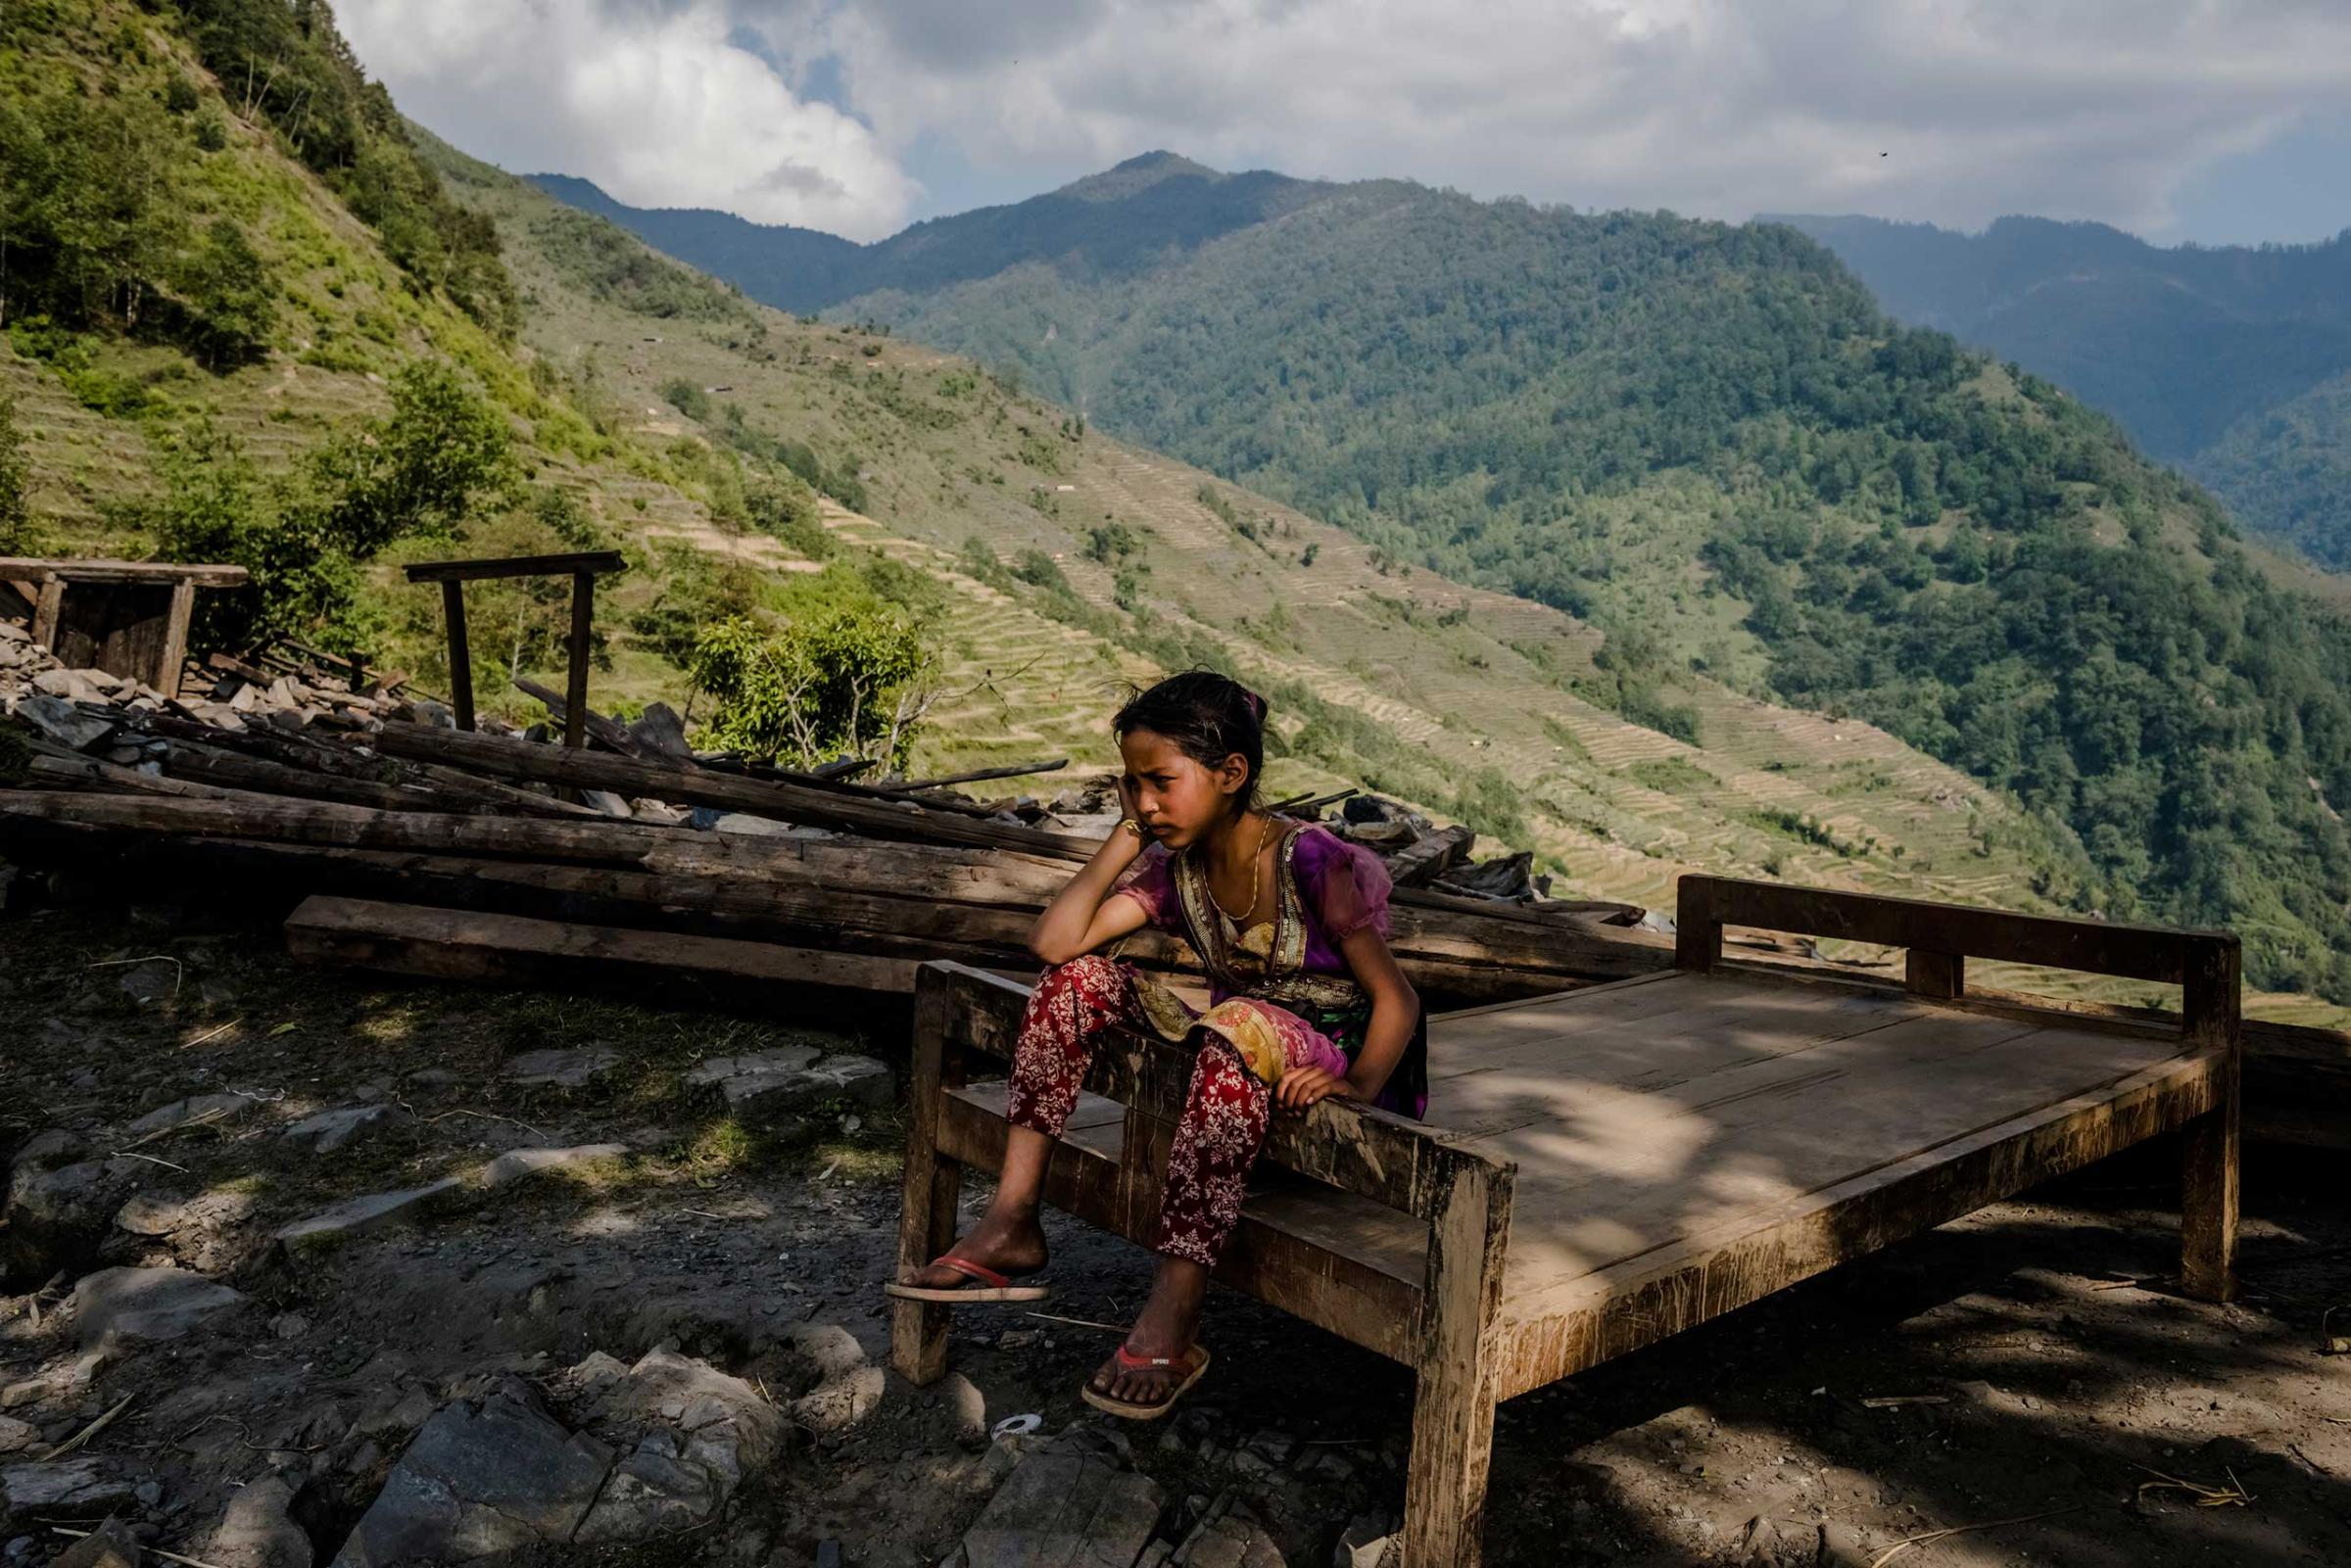 A girl rests on a bed frame salvaged from the ruins of her home in the village of Barpak. In the village, the epicenter of the April 25 earthquake and one of the larger villages in the mountainous Gorkha district, 1,200 out of 1,475 houses were destroyed. Local authorities said 69 people were killed, 50 were seriously injured and some were still missing. Barpak, Nepal. May 5, 2015.